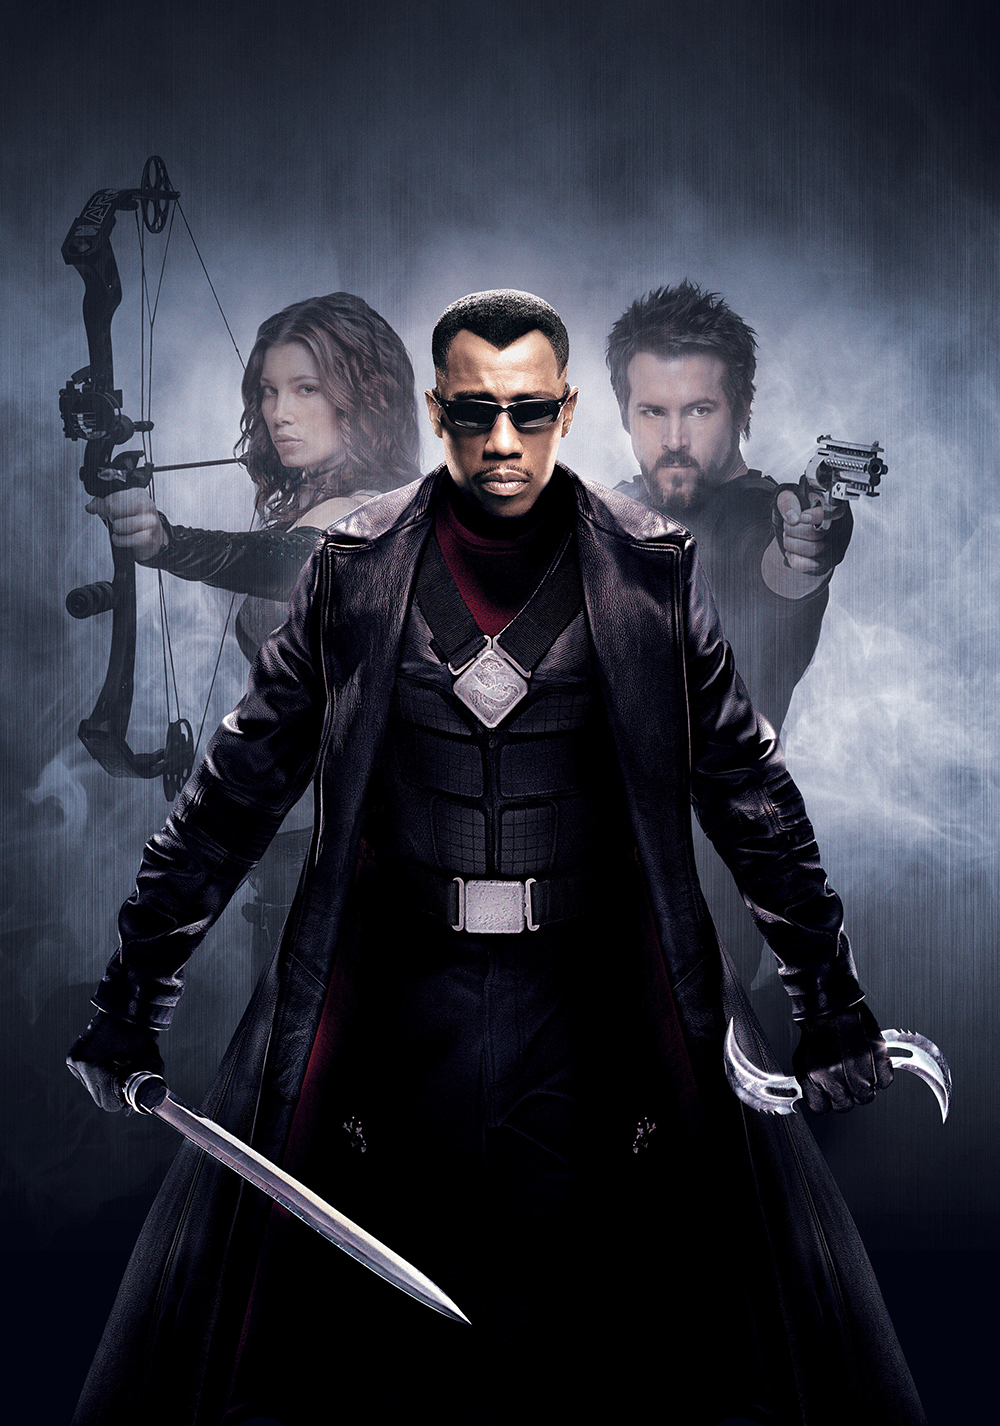 Blade 3 - The ending was stupid - Dracula turns into Blade so the humans think Blade is dead, but turns back so the humans know Blade survived. They had two more endings. One in which Blade is too weak, he stops Dracula but he lives and Blade is taken to a morgue which he escapes. The other one shows Blade fighting a new enemy - werewolves after vampires been wiped out.